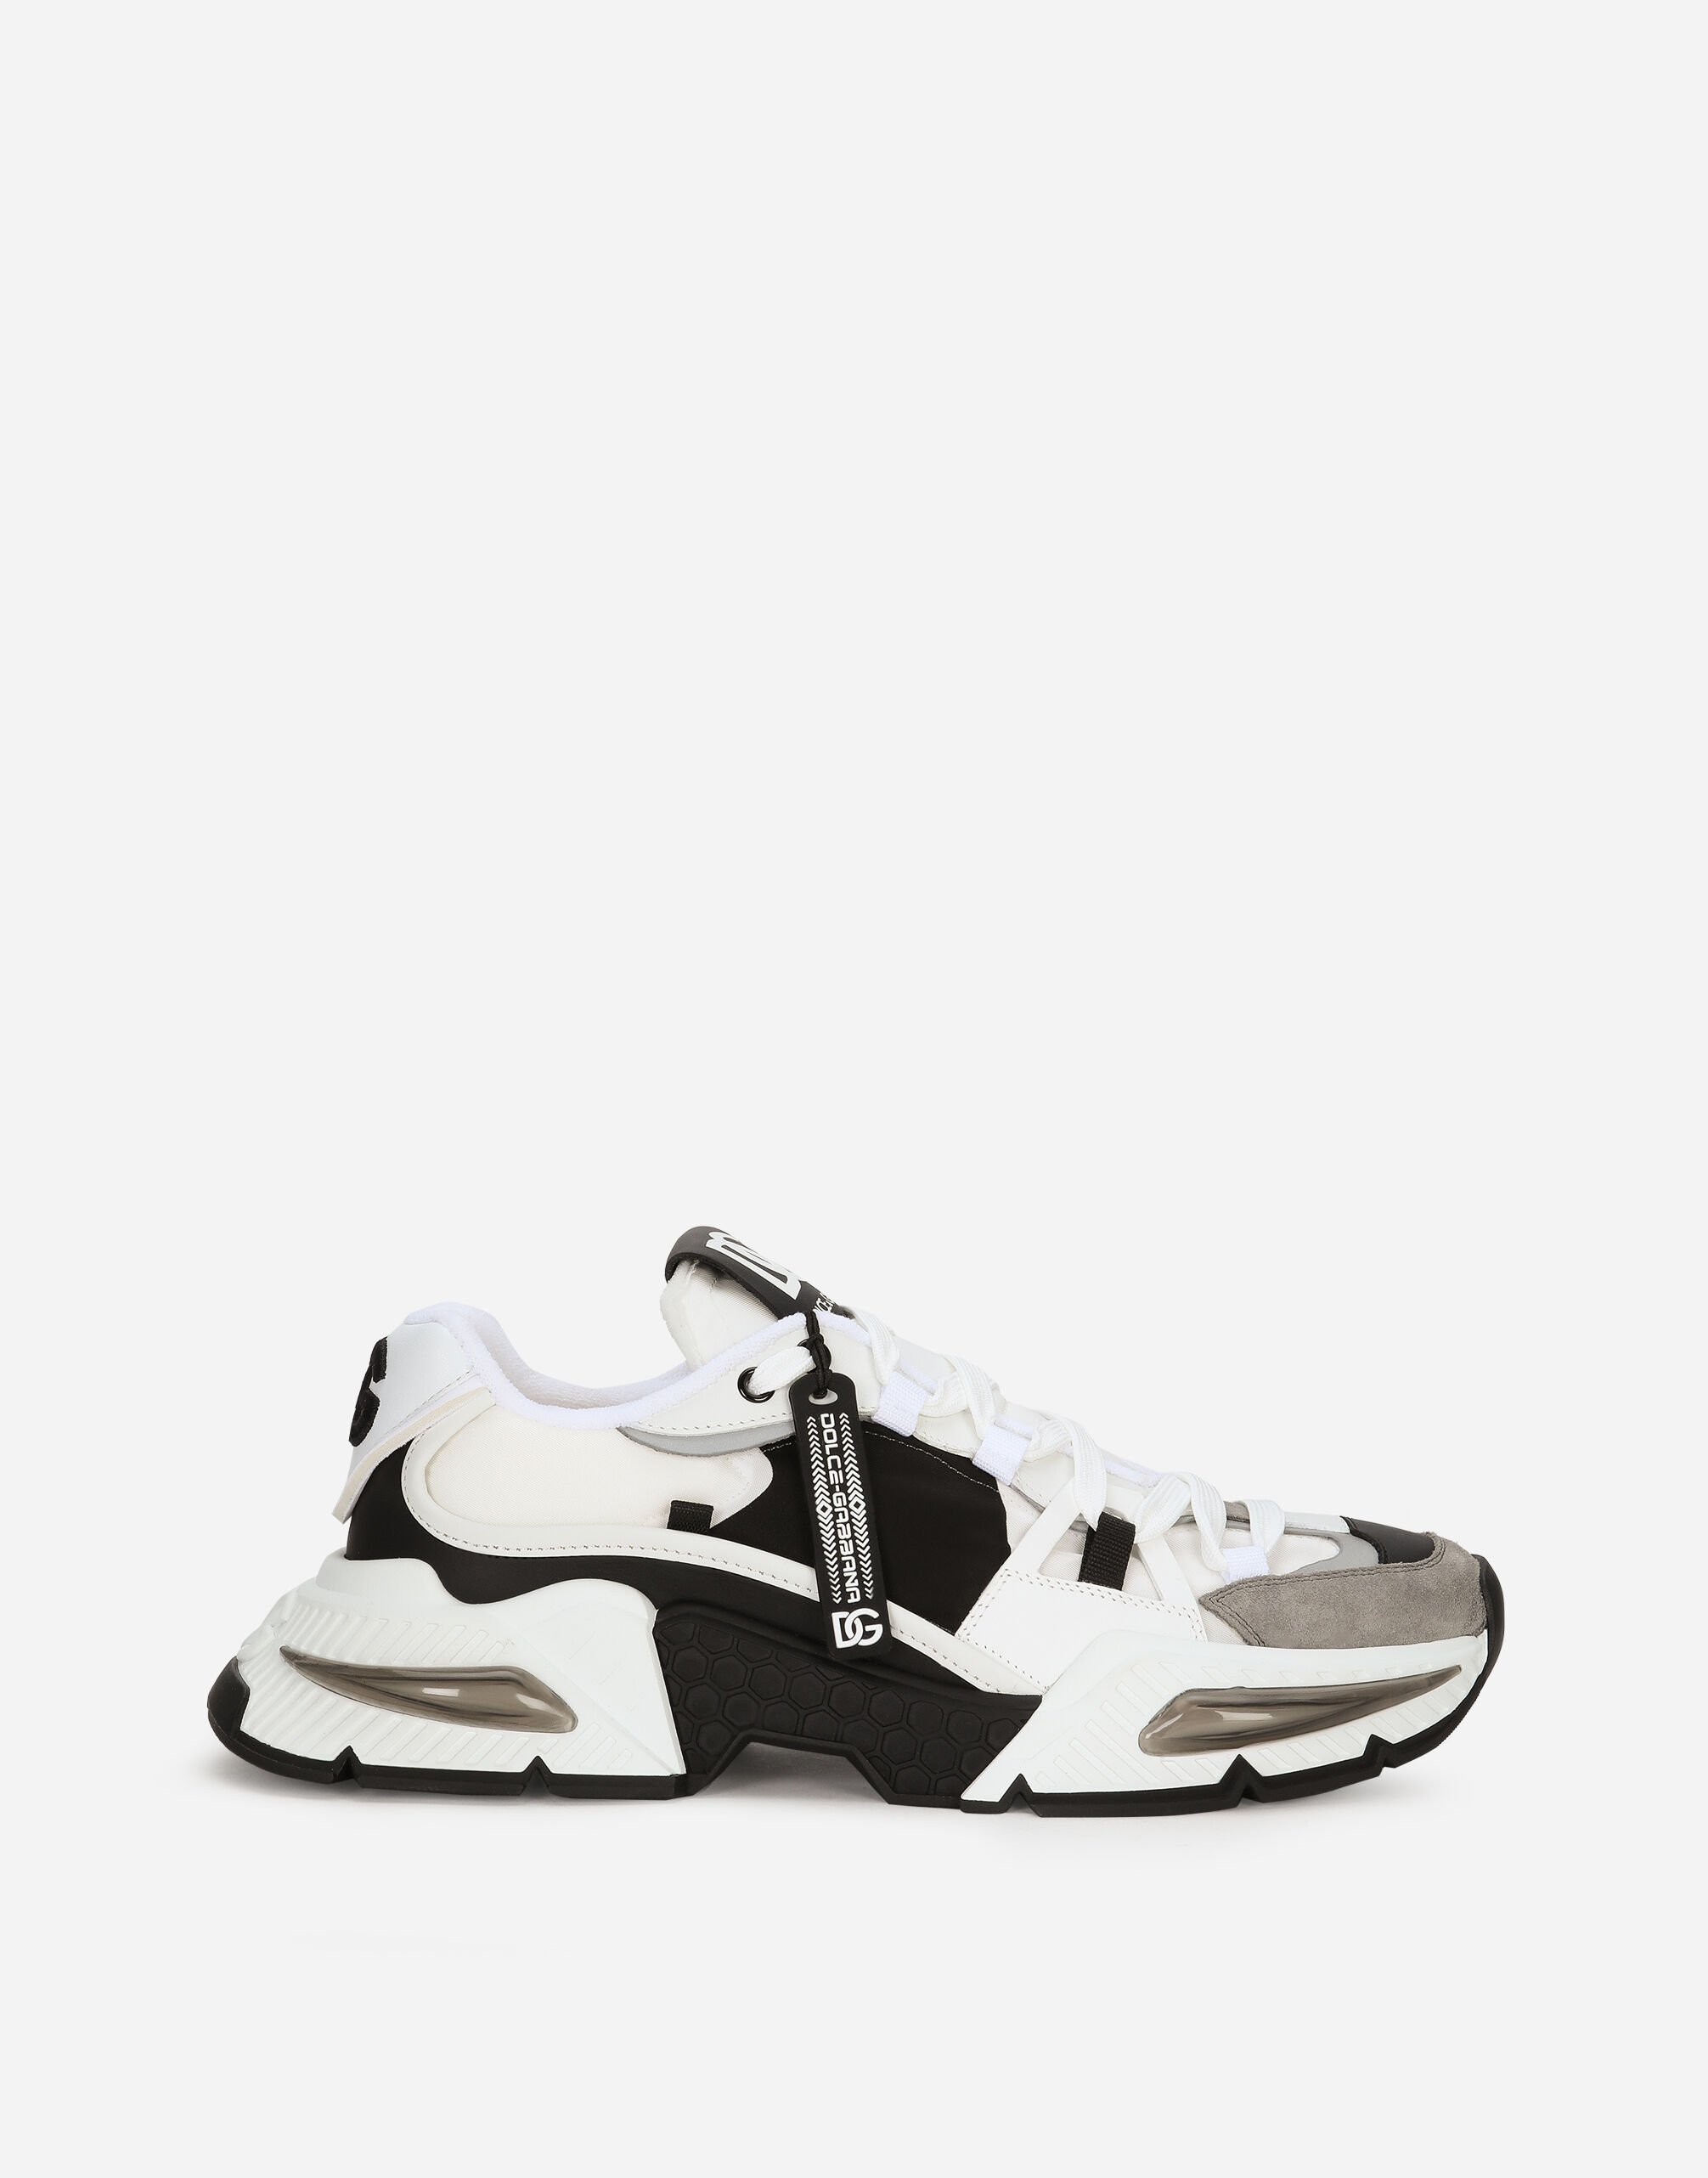 ${brand} Mixed-material Airmaster sneakers ${colorDescription} ${masterID}